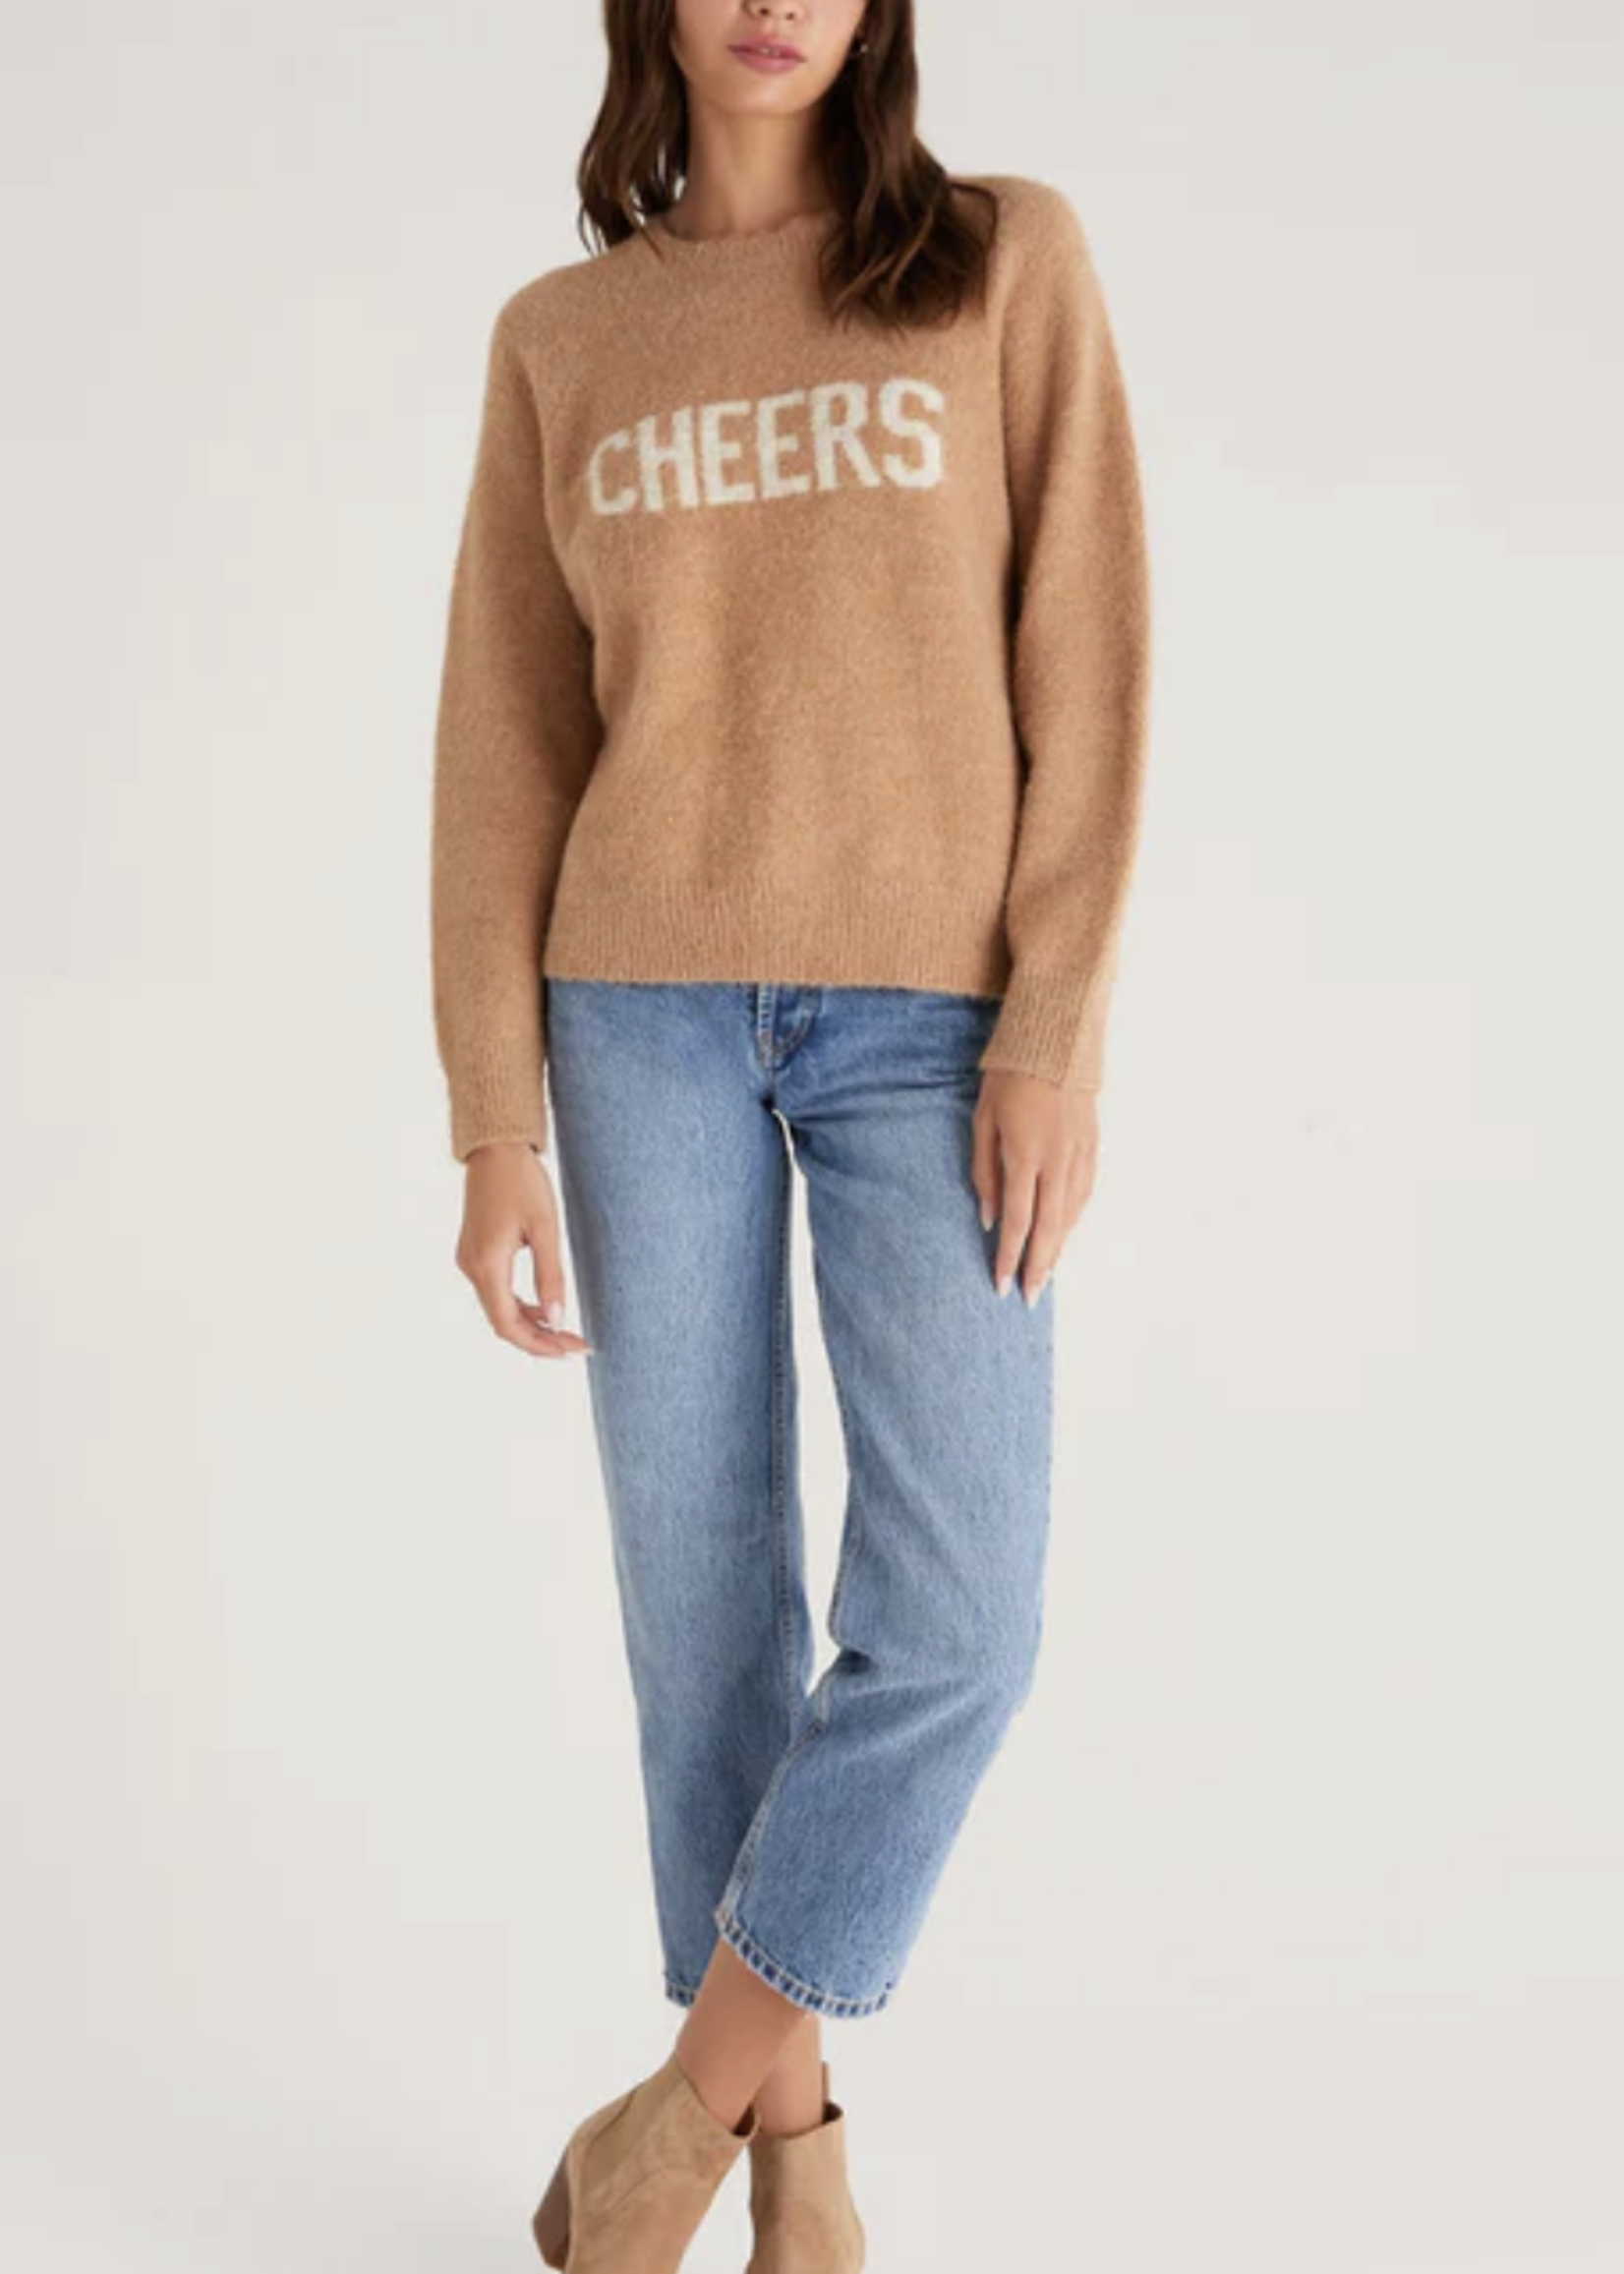 Z SUPPLY LIZZY CHEERS MARLED SWEATER